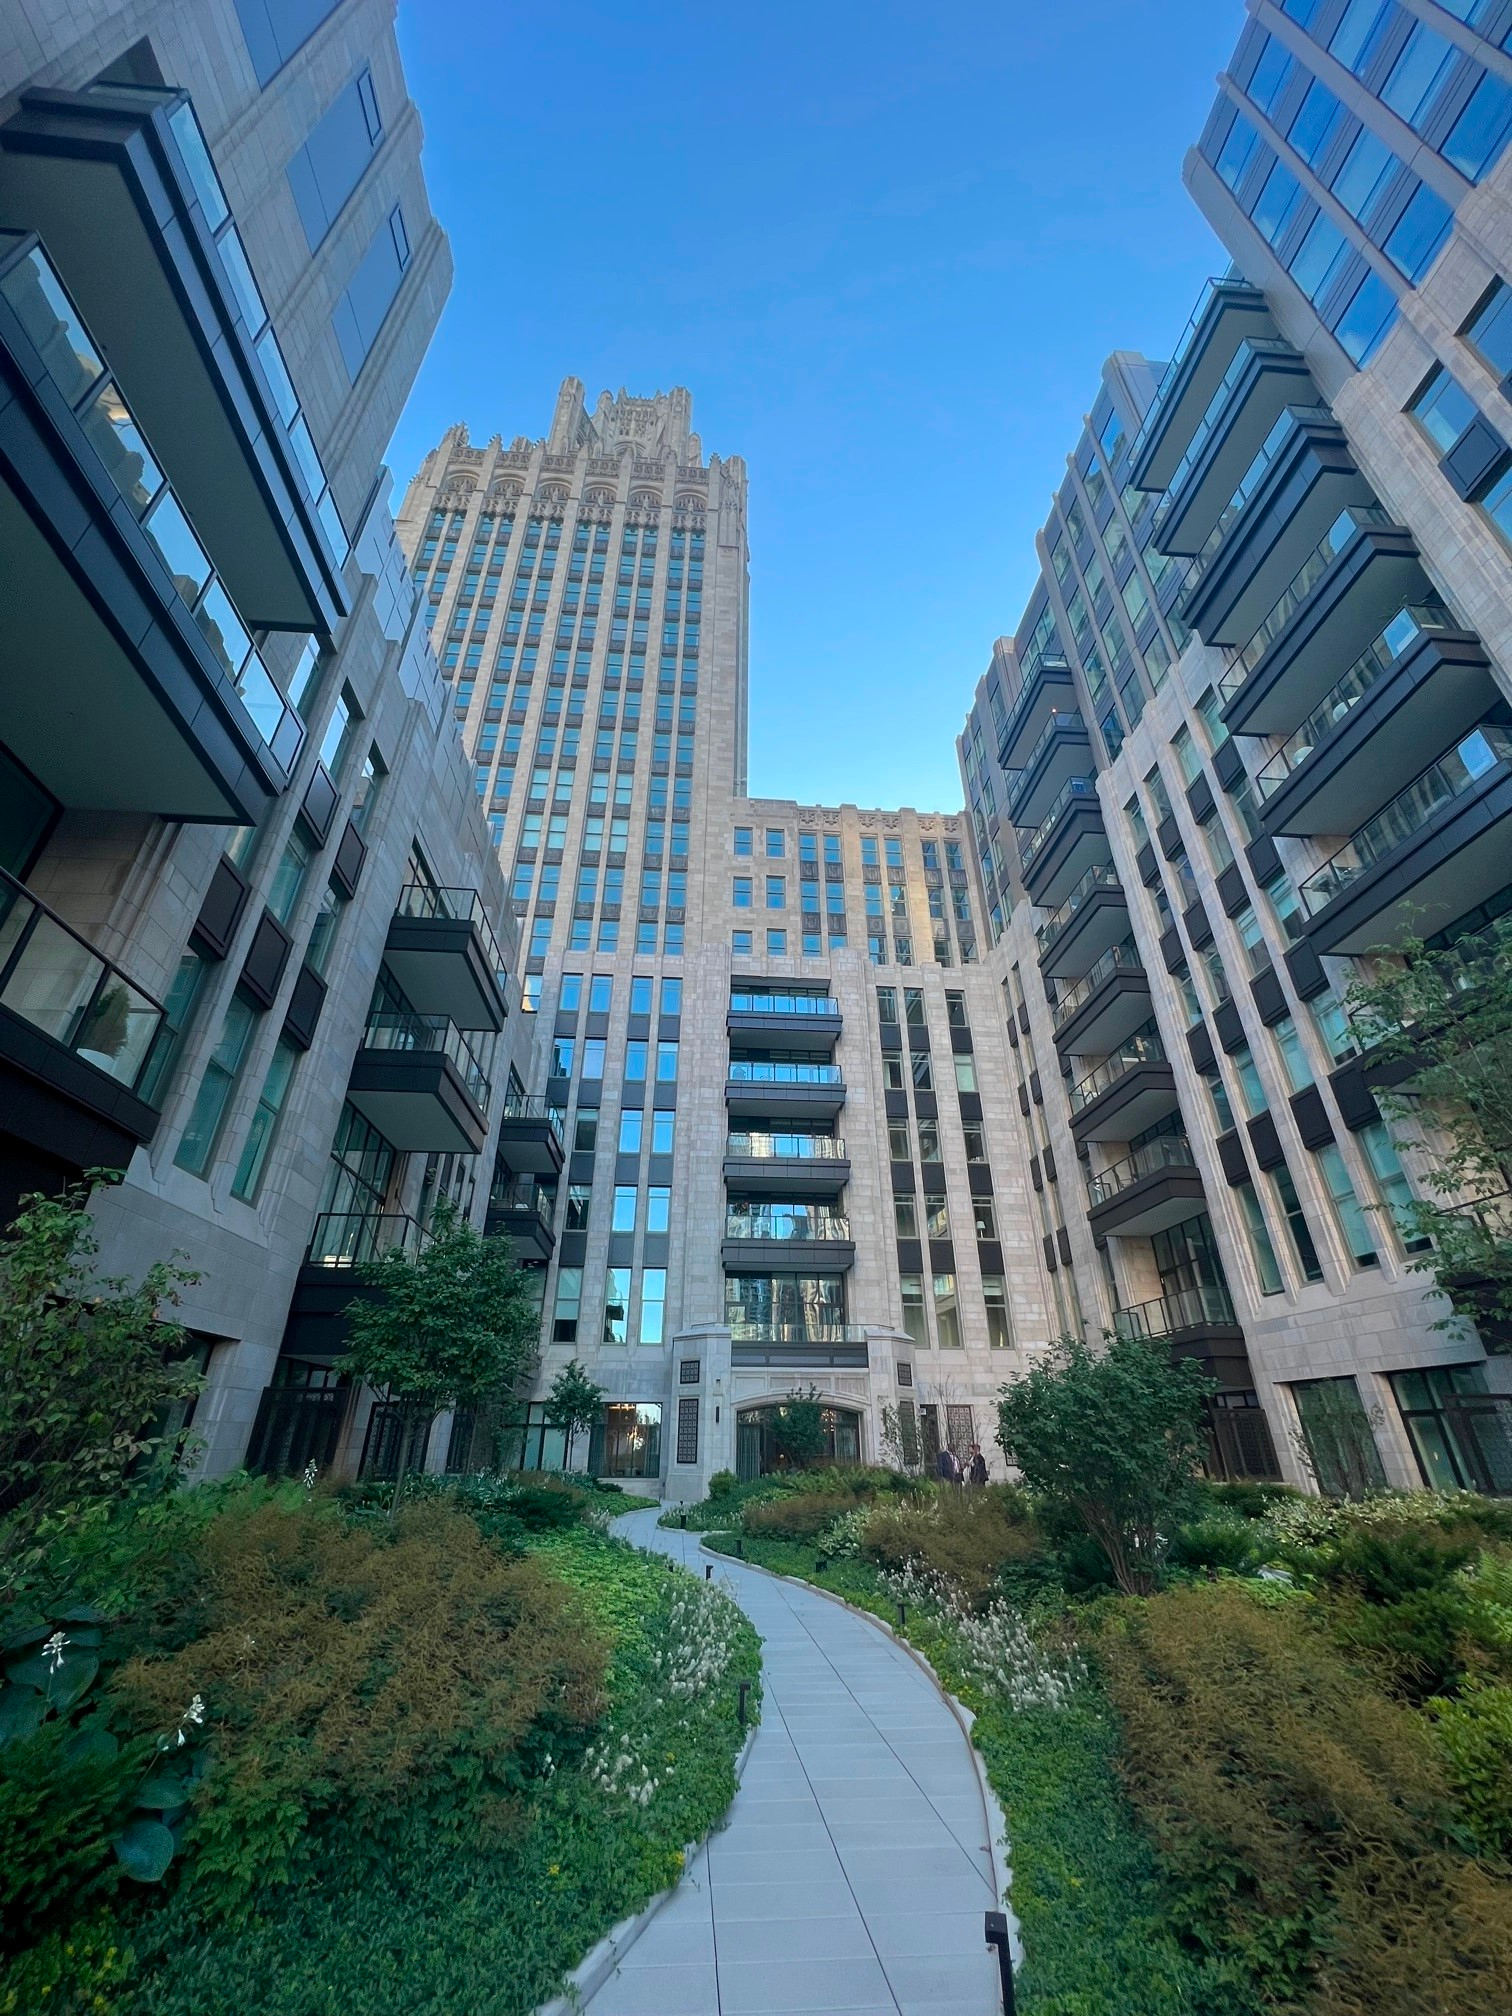 Tribune Tower Complex Renovation – New Level 3 courtyard carved out of existing structure